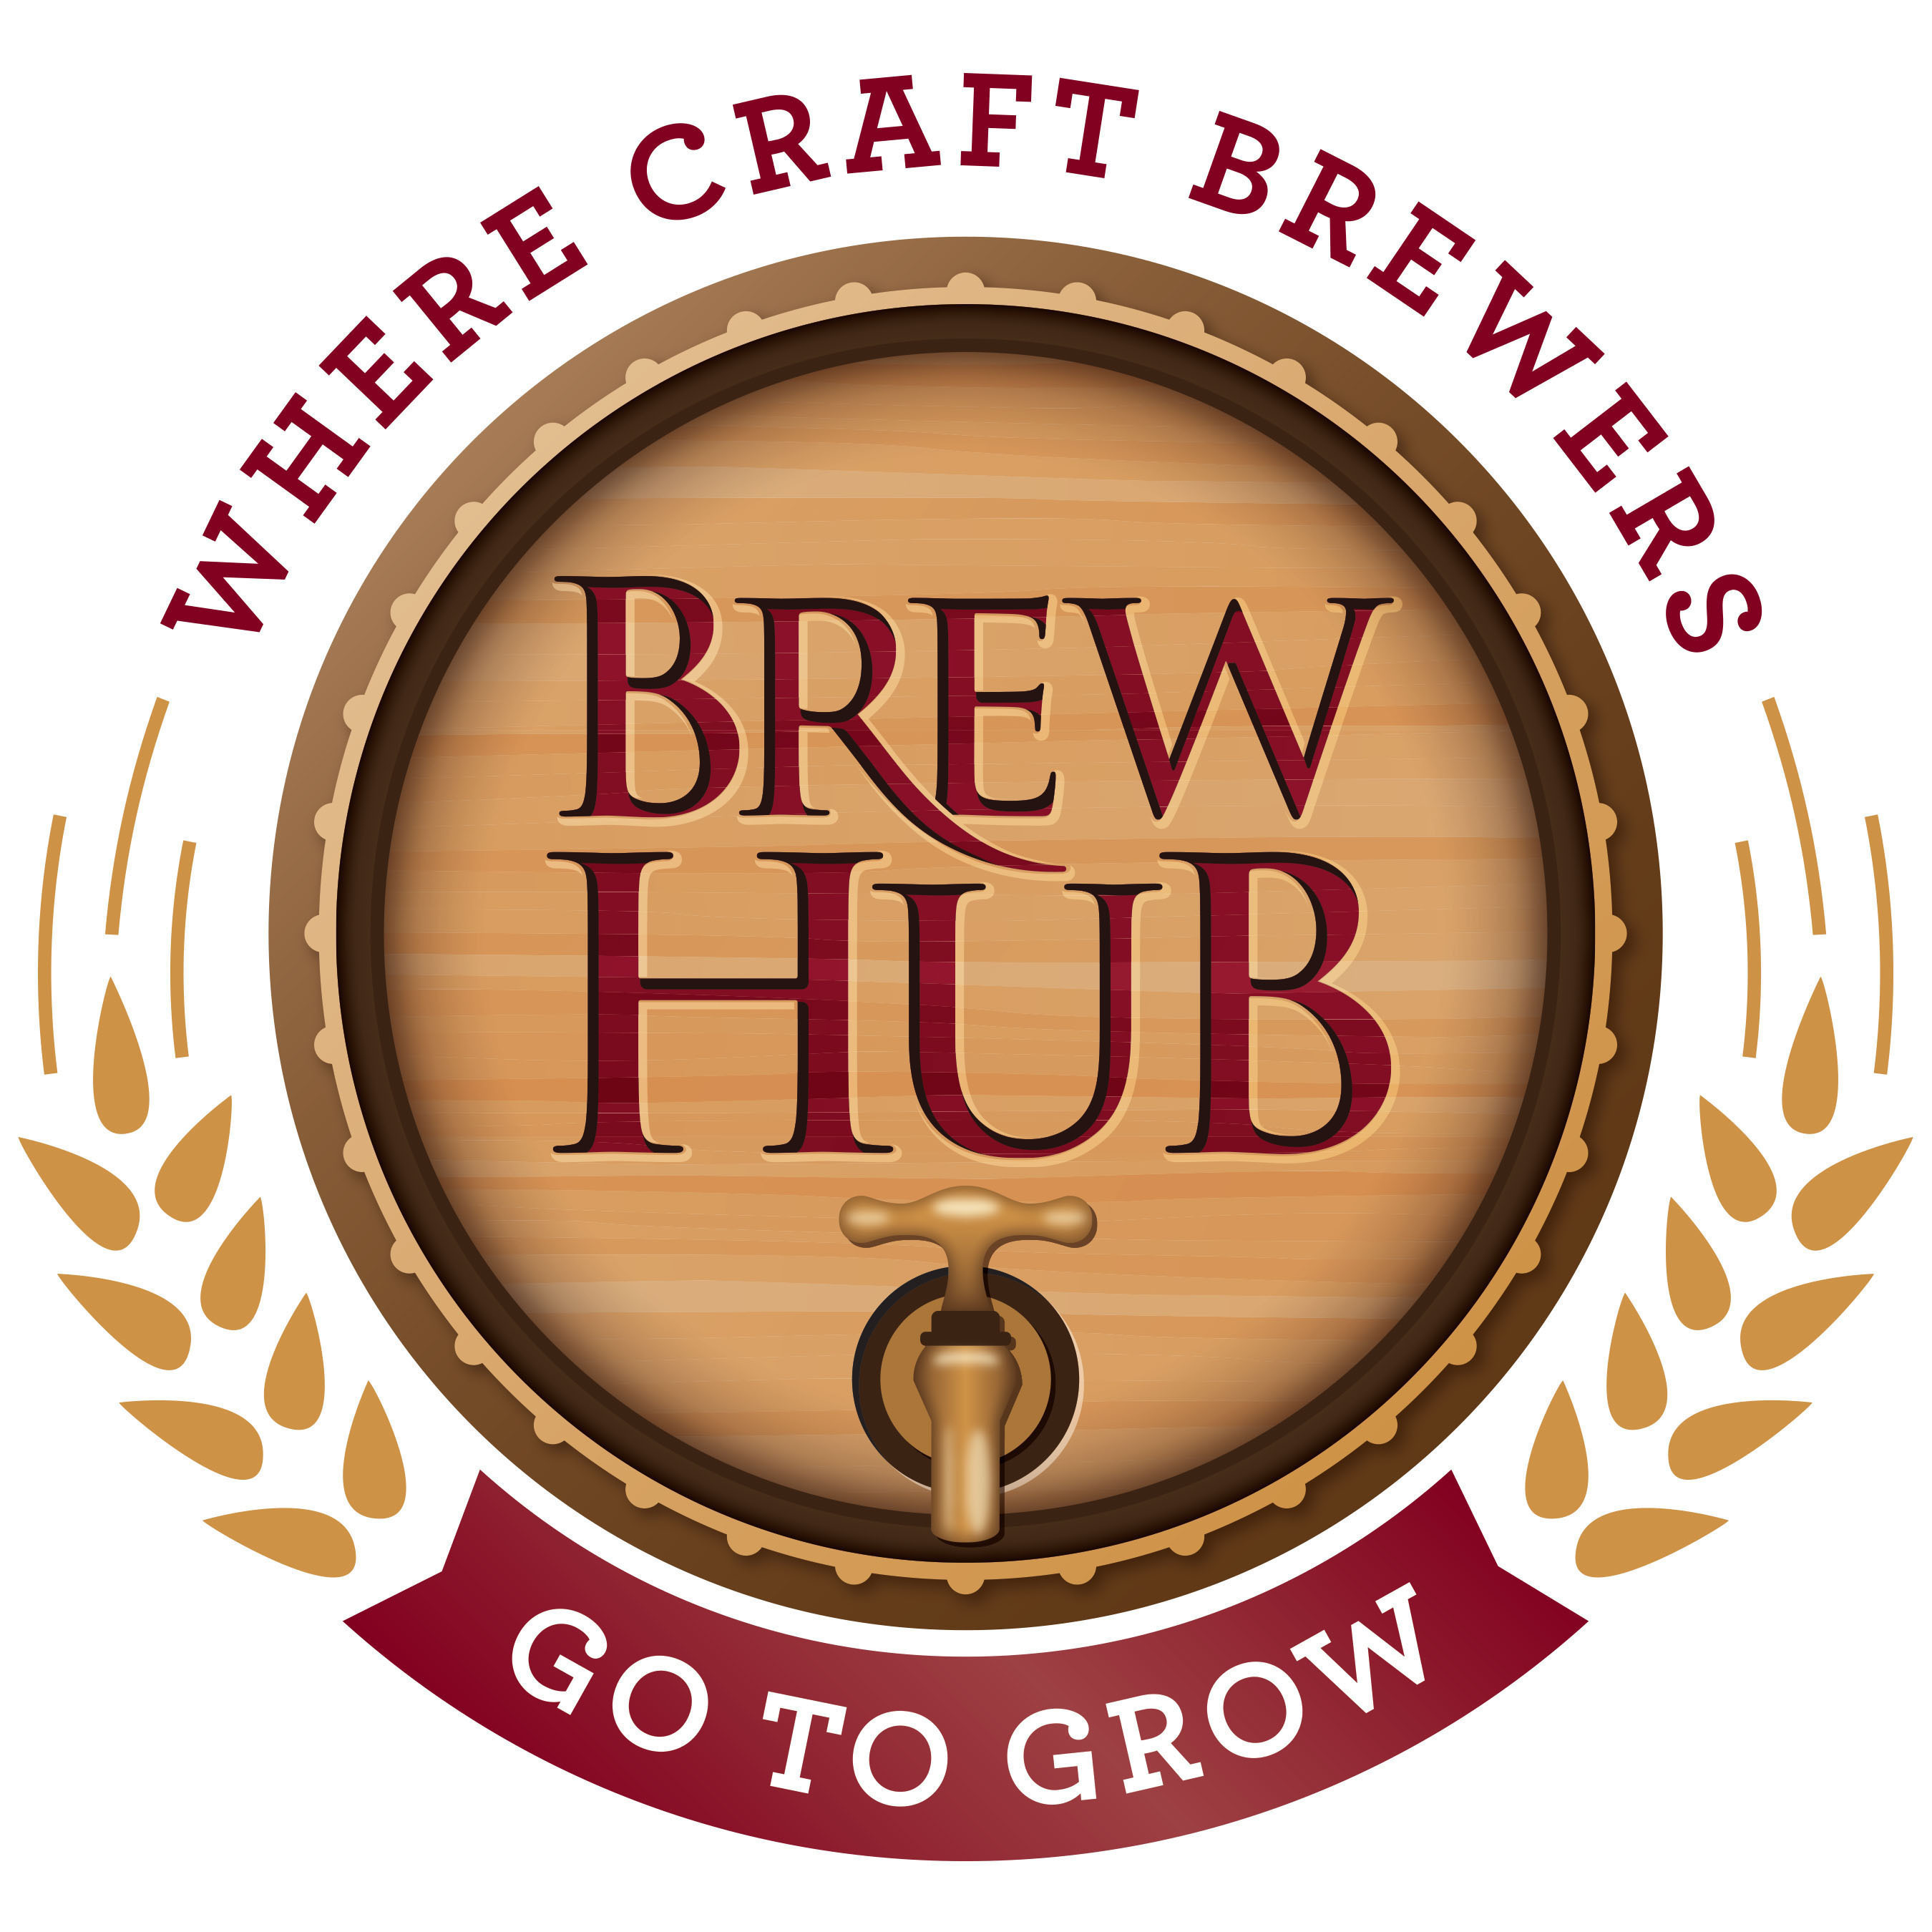 BREW HUB ANNOUNCES PLANS FOR FIRST BREWERY IN LAKELAND, FLORIDA Facility Will Be the First of Five New Breweries Located Across the Country That Will Allow Craft Brewers to Reach New Market. (PRNewsFoto/Brew Hub) (PRNewsFoto/BREW HUB)